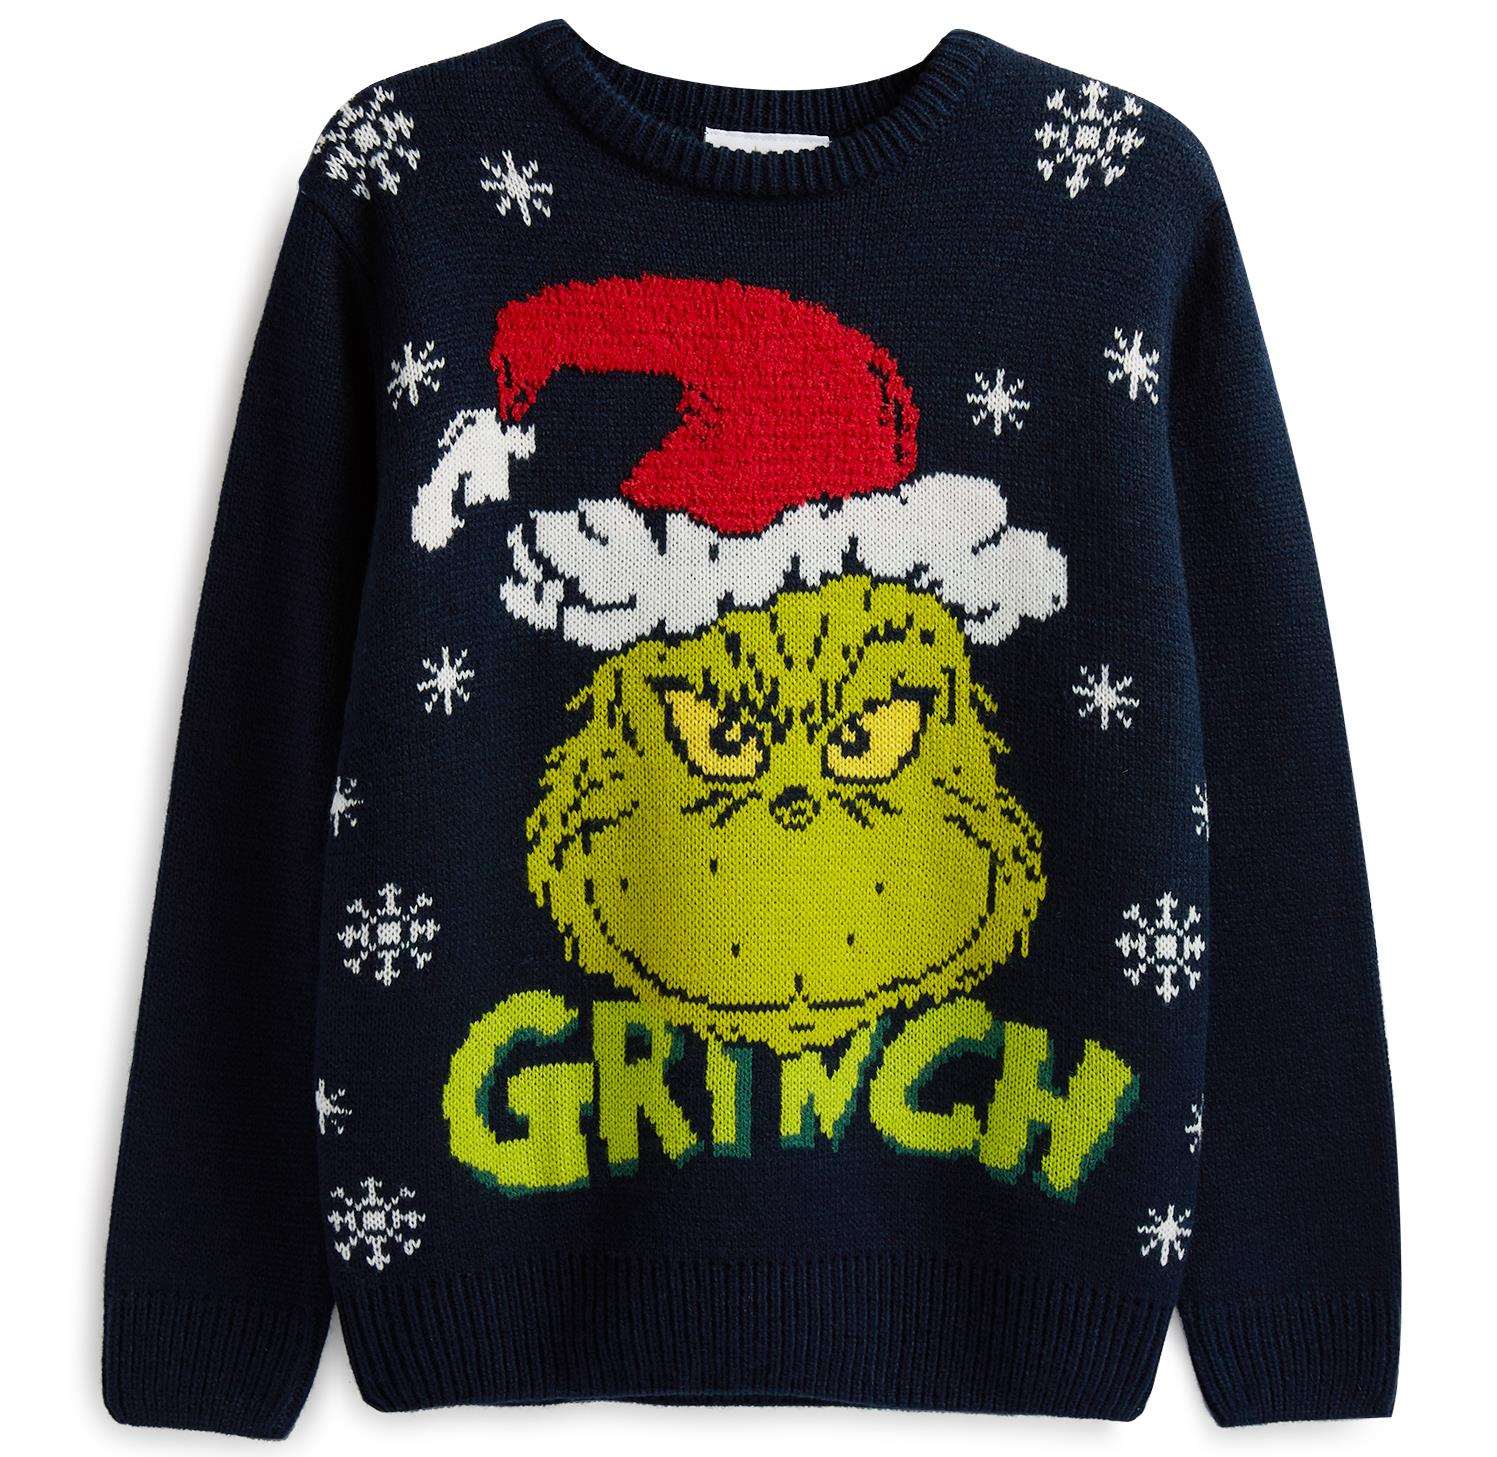 The children's Christmas jumper to leave everyone green with envy? This is £12 from Primark.